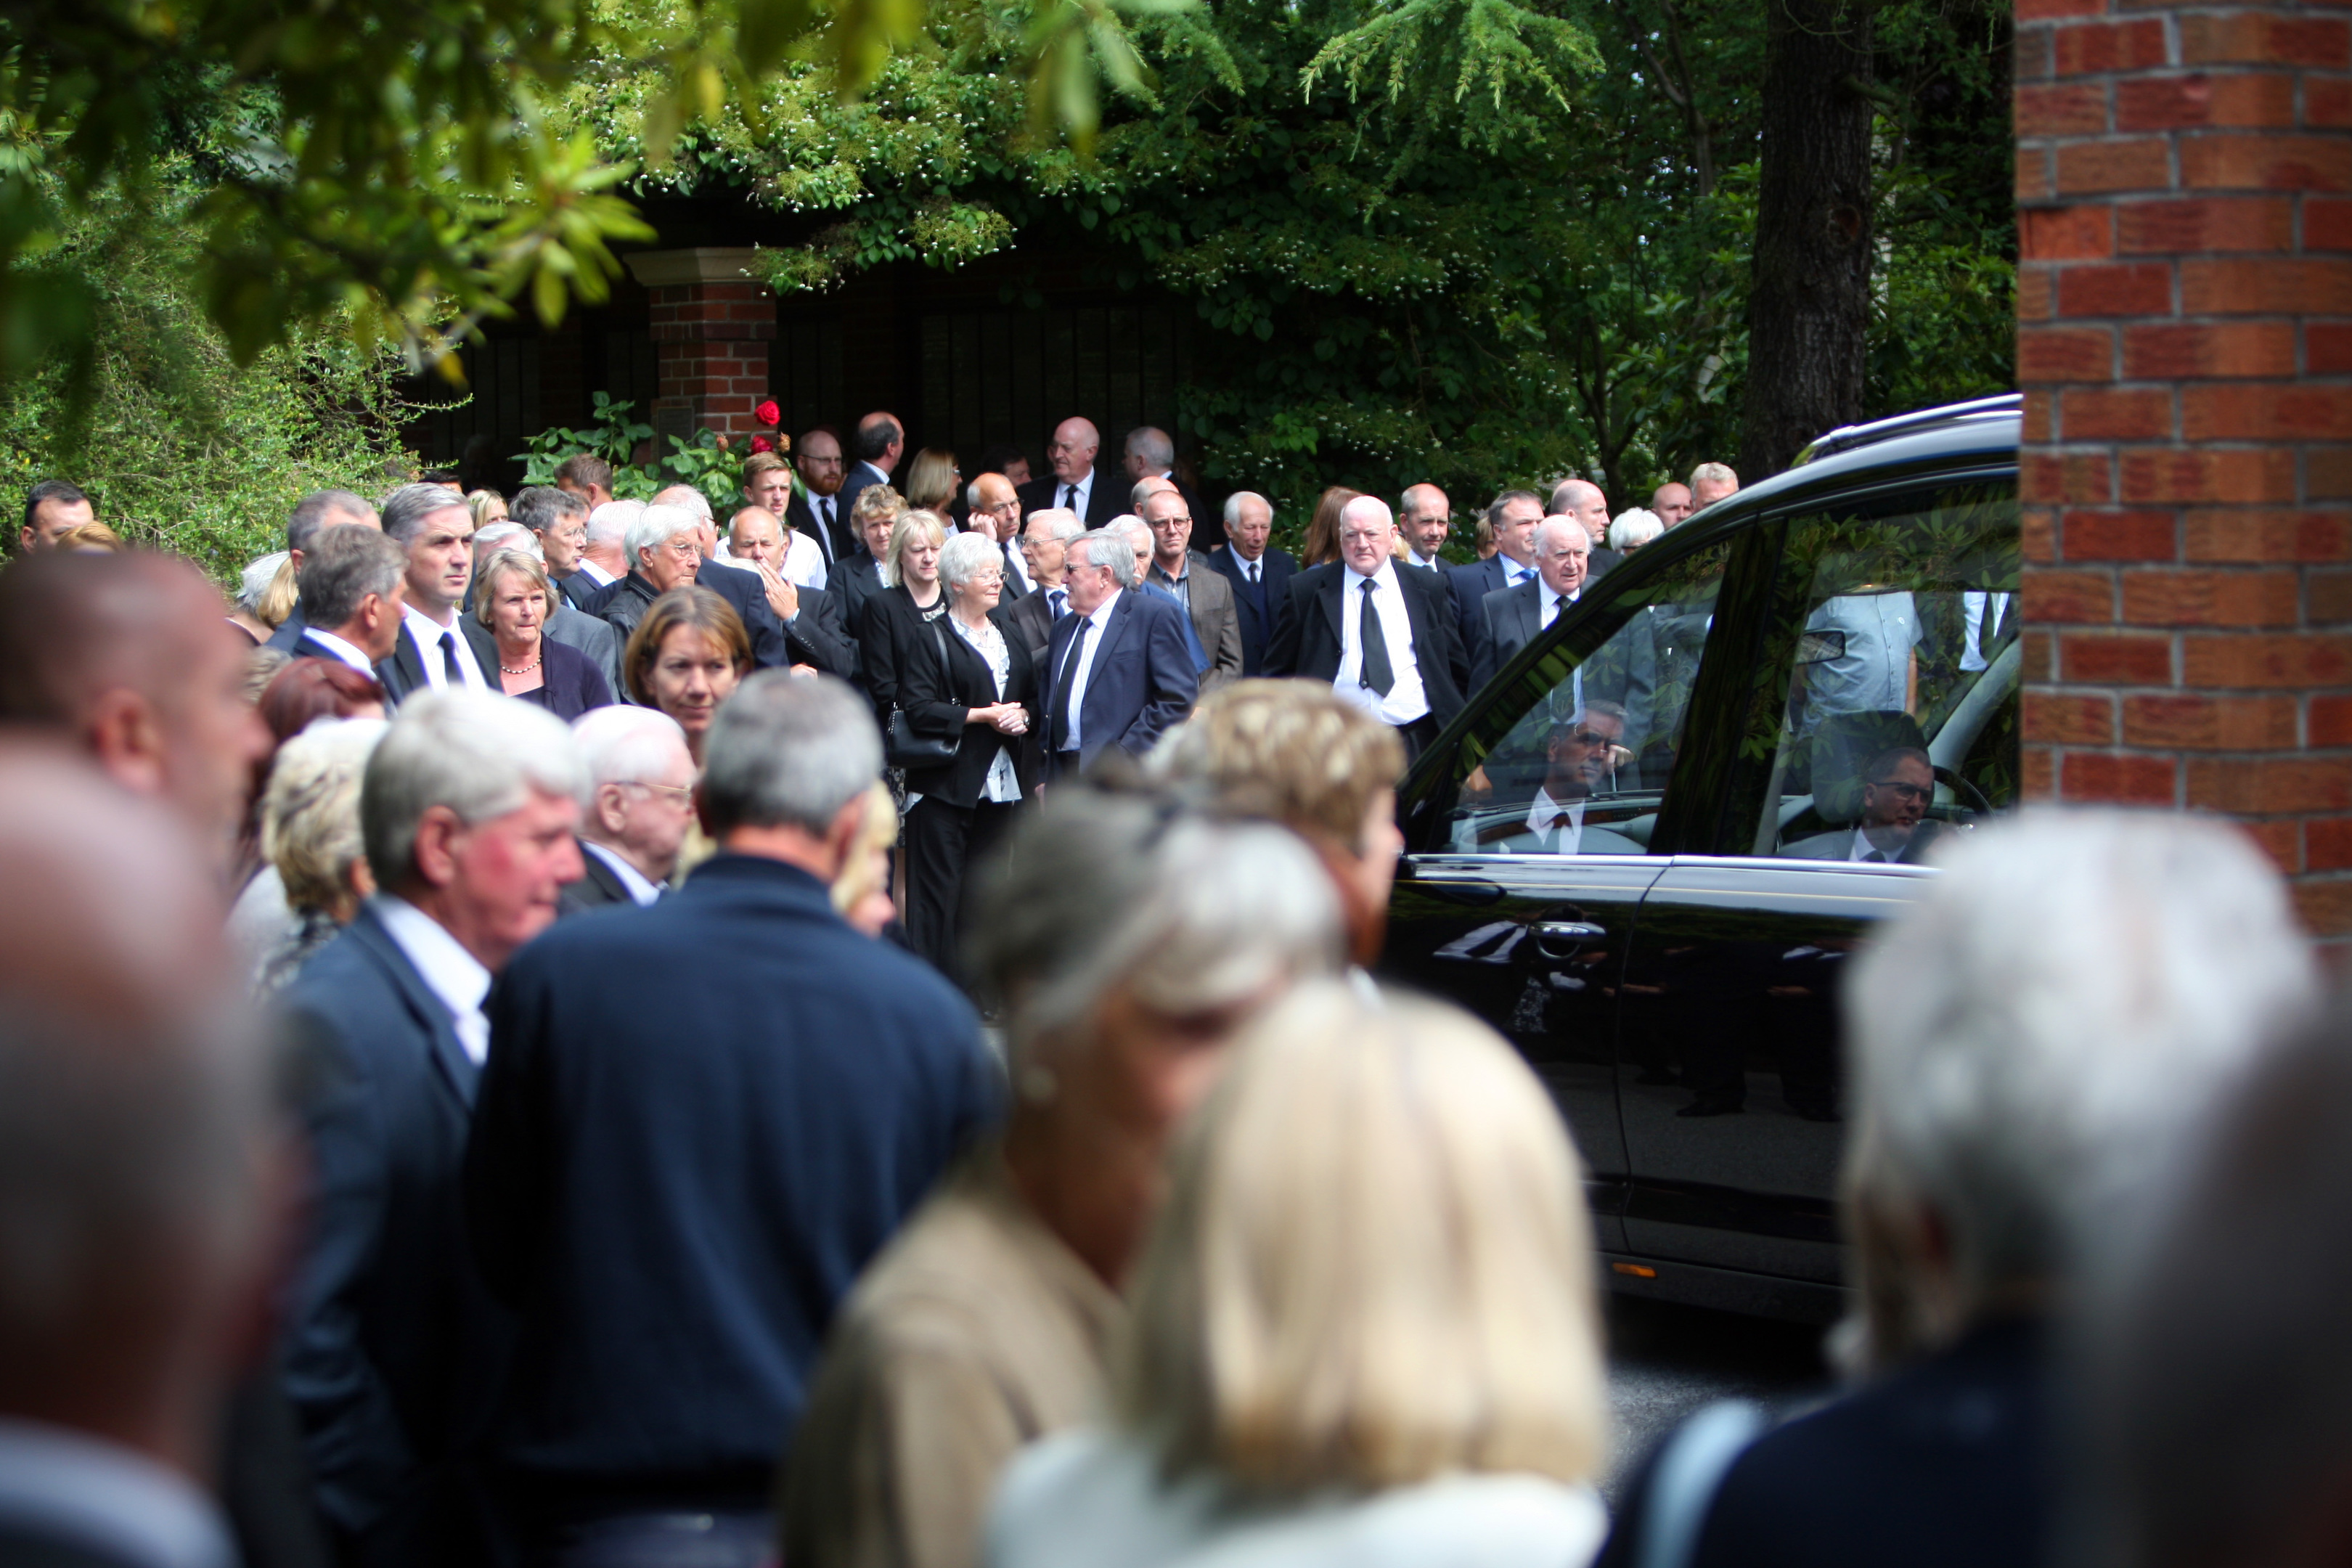 Hundreds of mourners gathered to pay their respects.